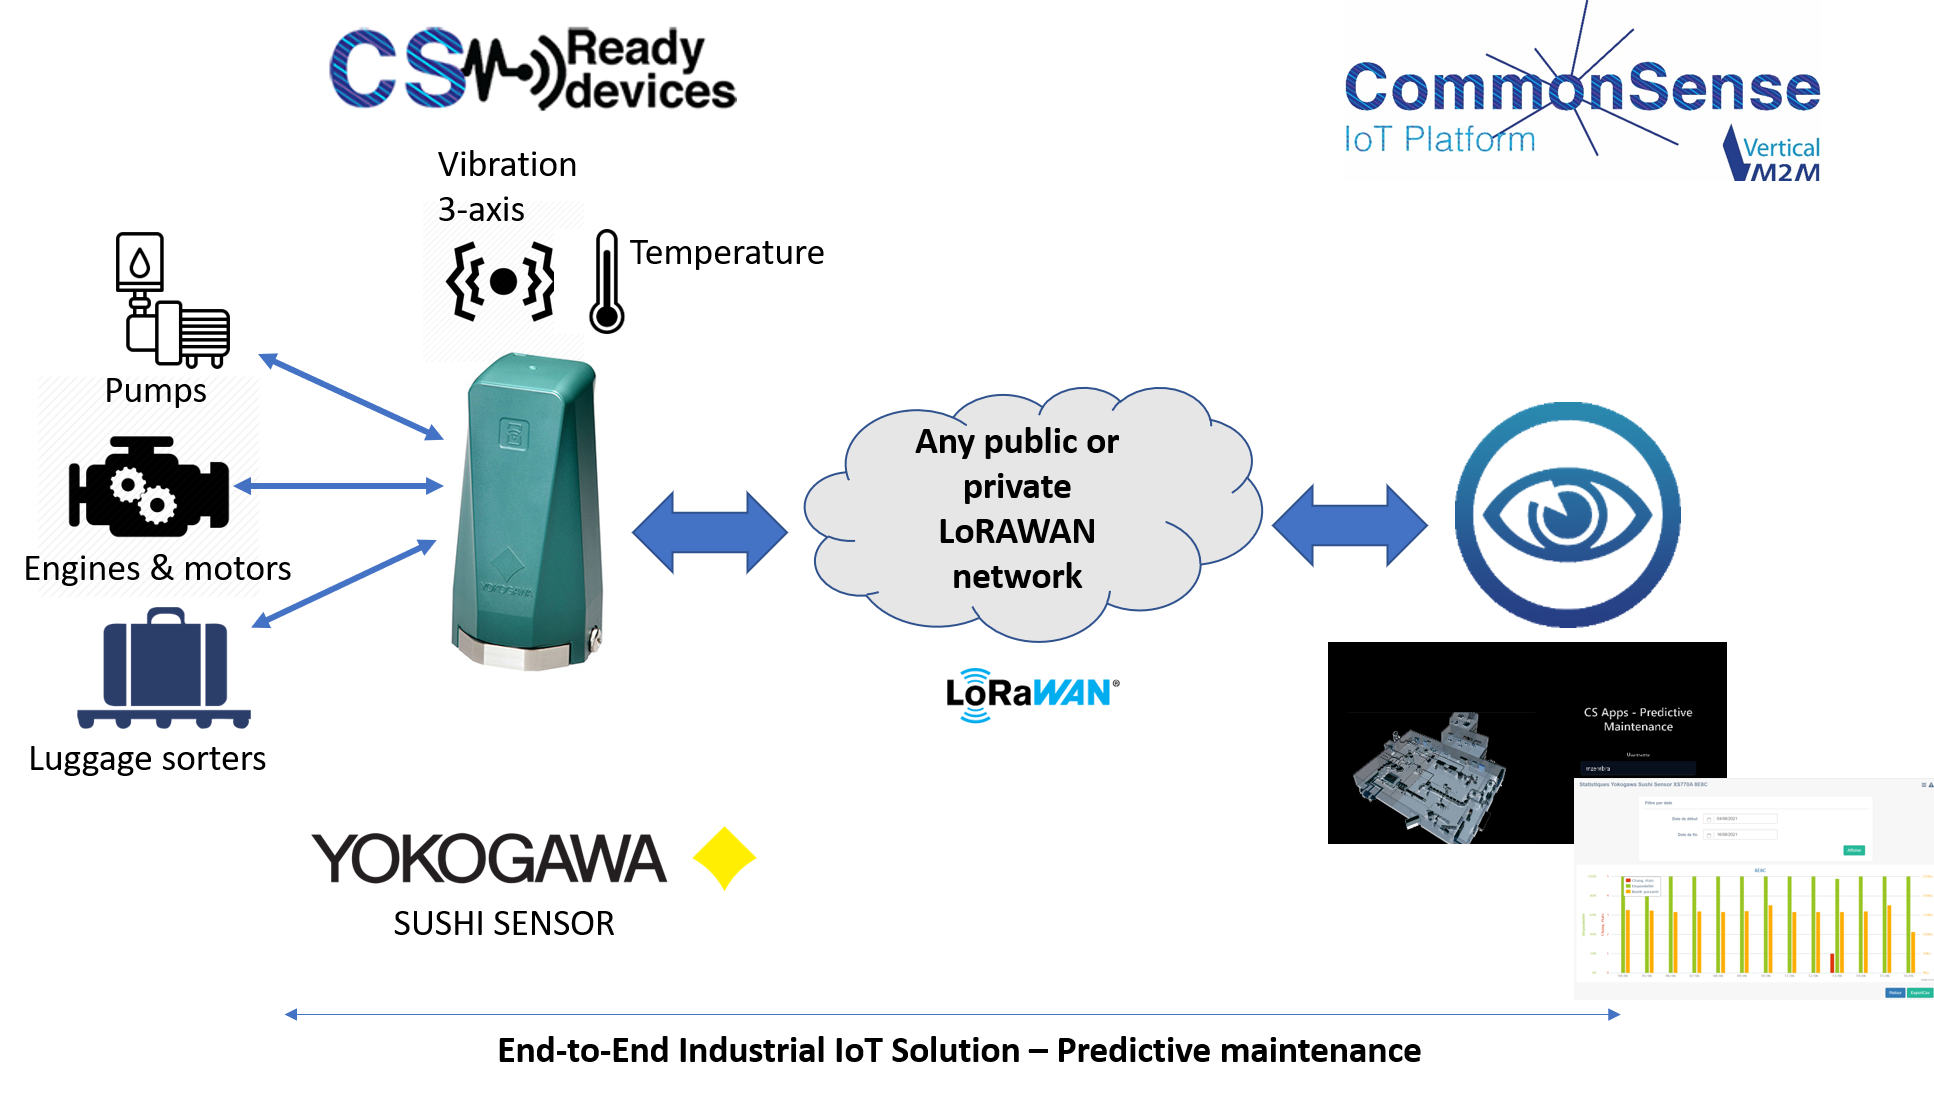 Industry 4.0 with CommonSense IoT Platform® #1 – predictive maintenance on engines, pumps and sorters (and many more industrial machines!)